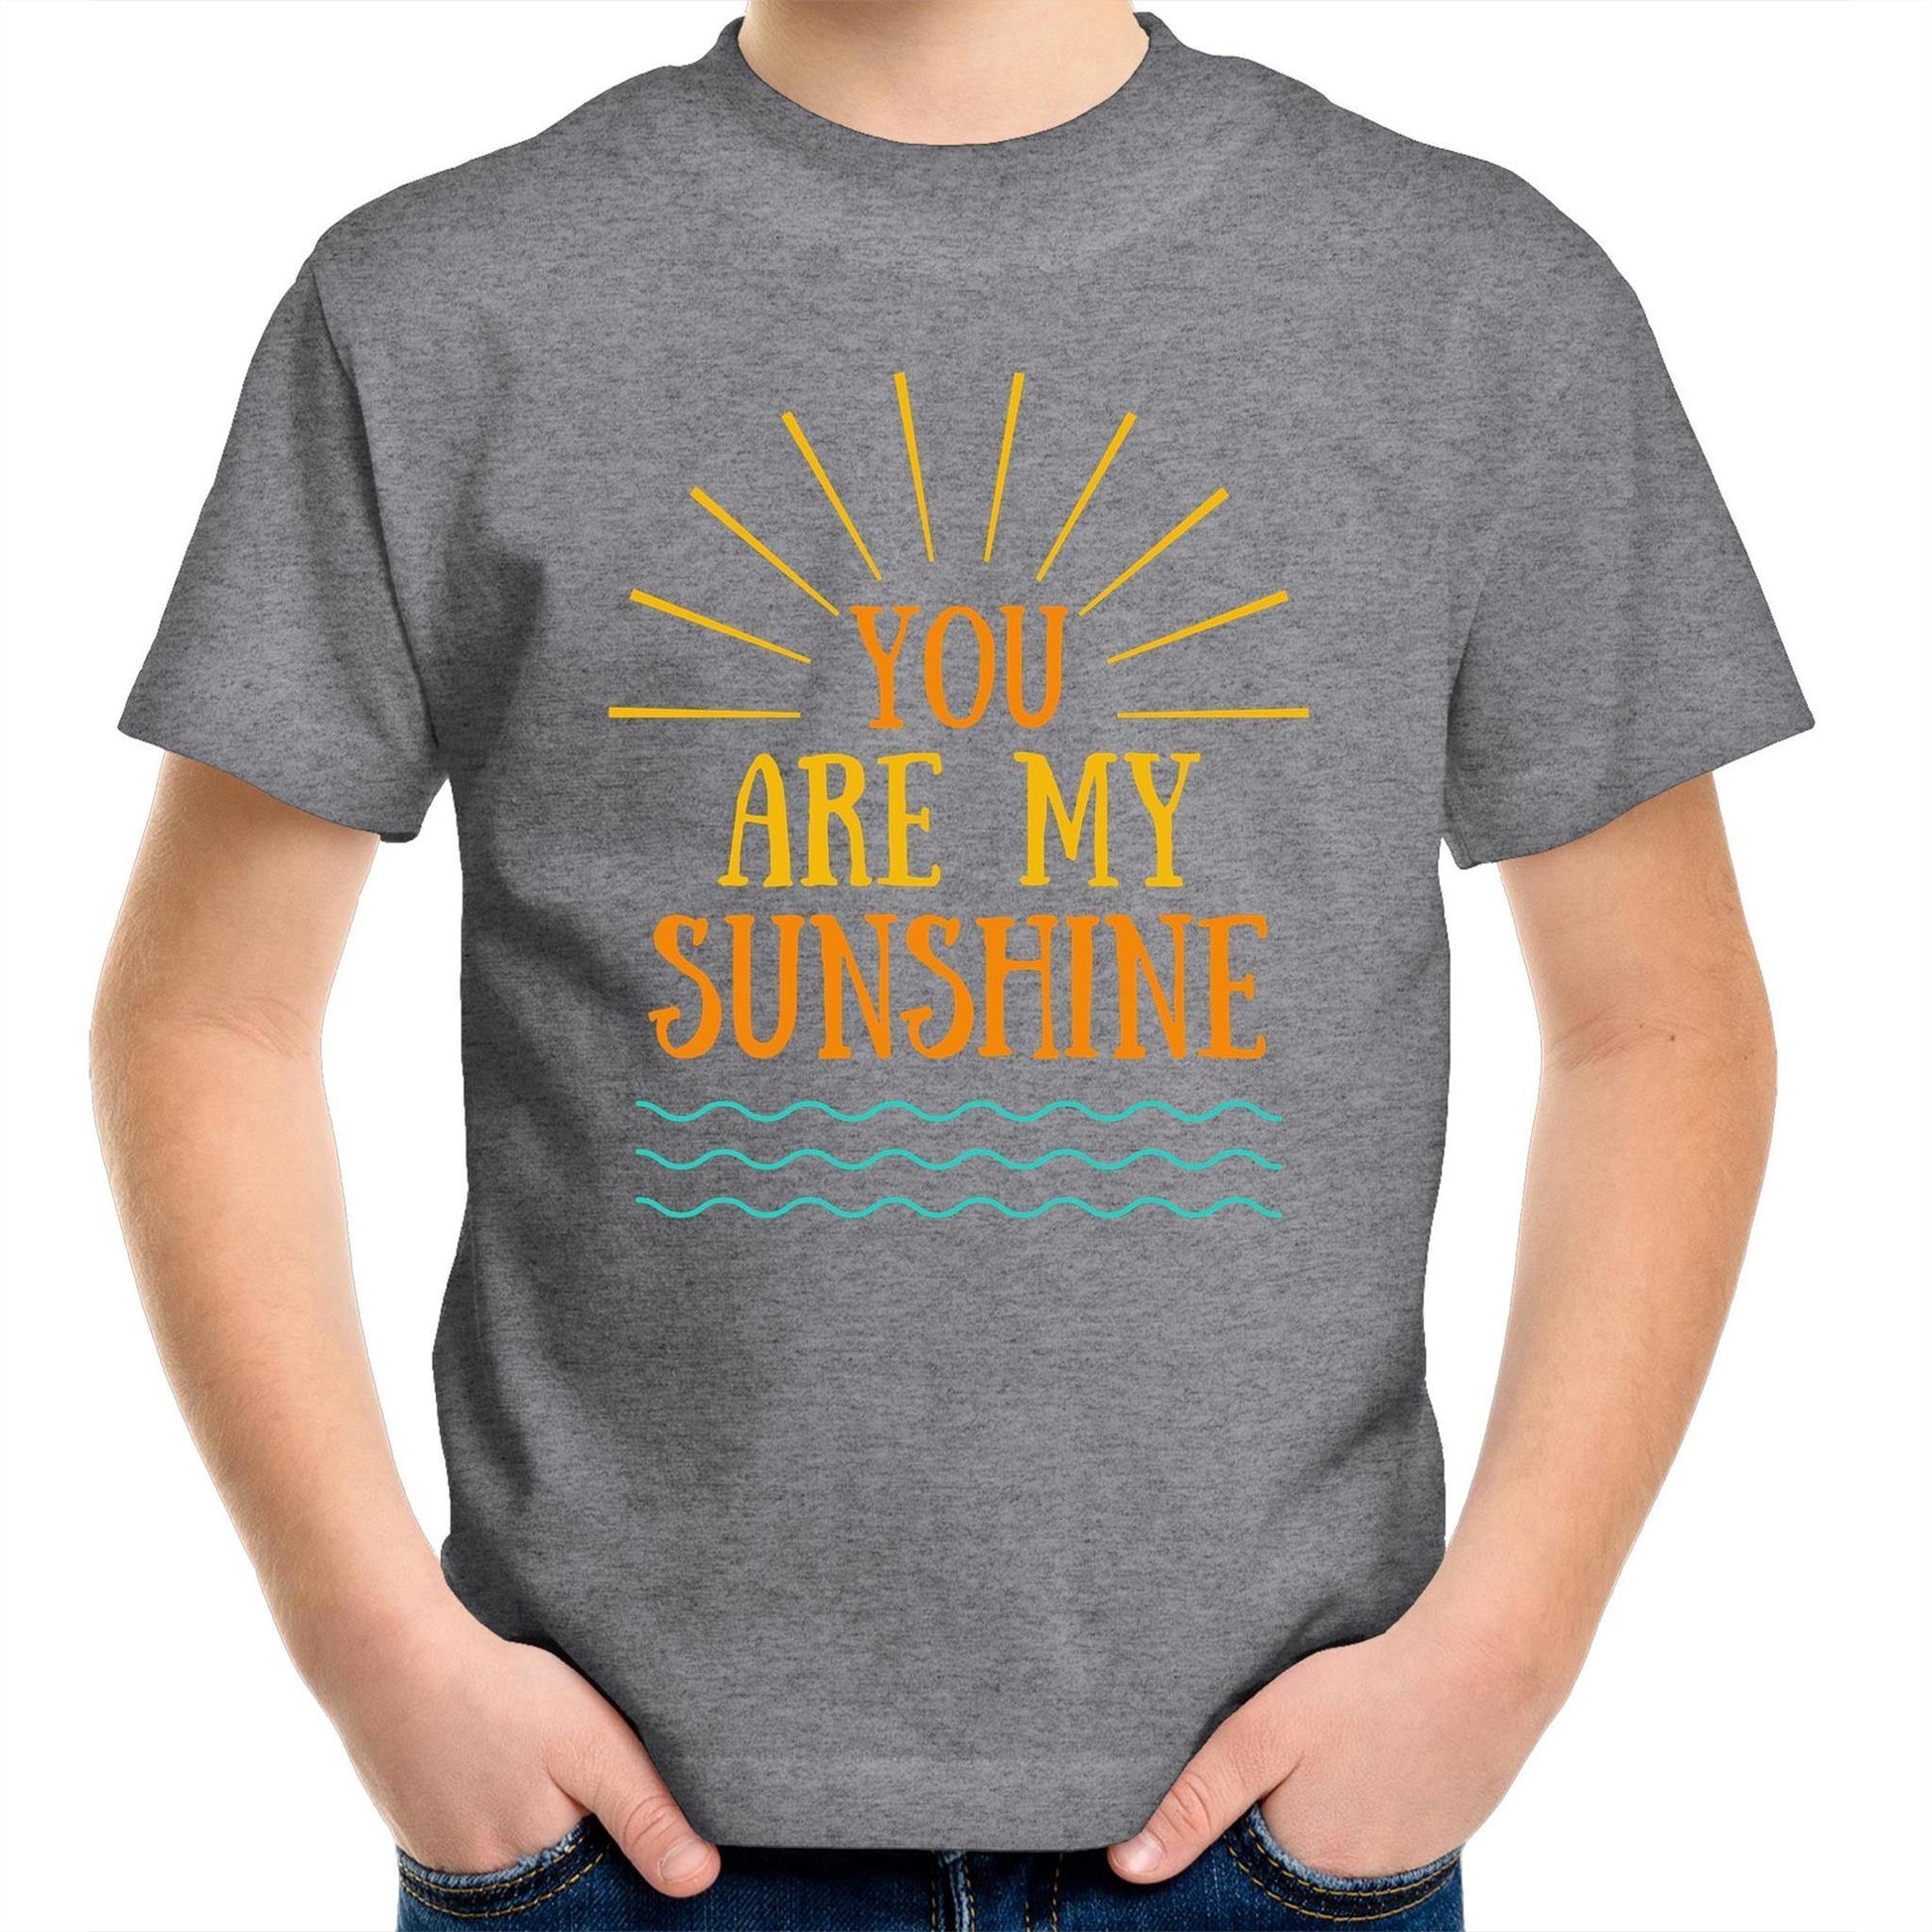 You Are My Sunshine - Kids Youth Crew T-Shirt Grey Marle Kids Youth T-shirt Summer